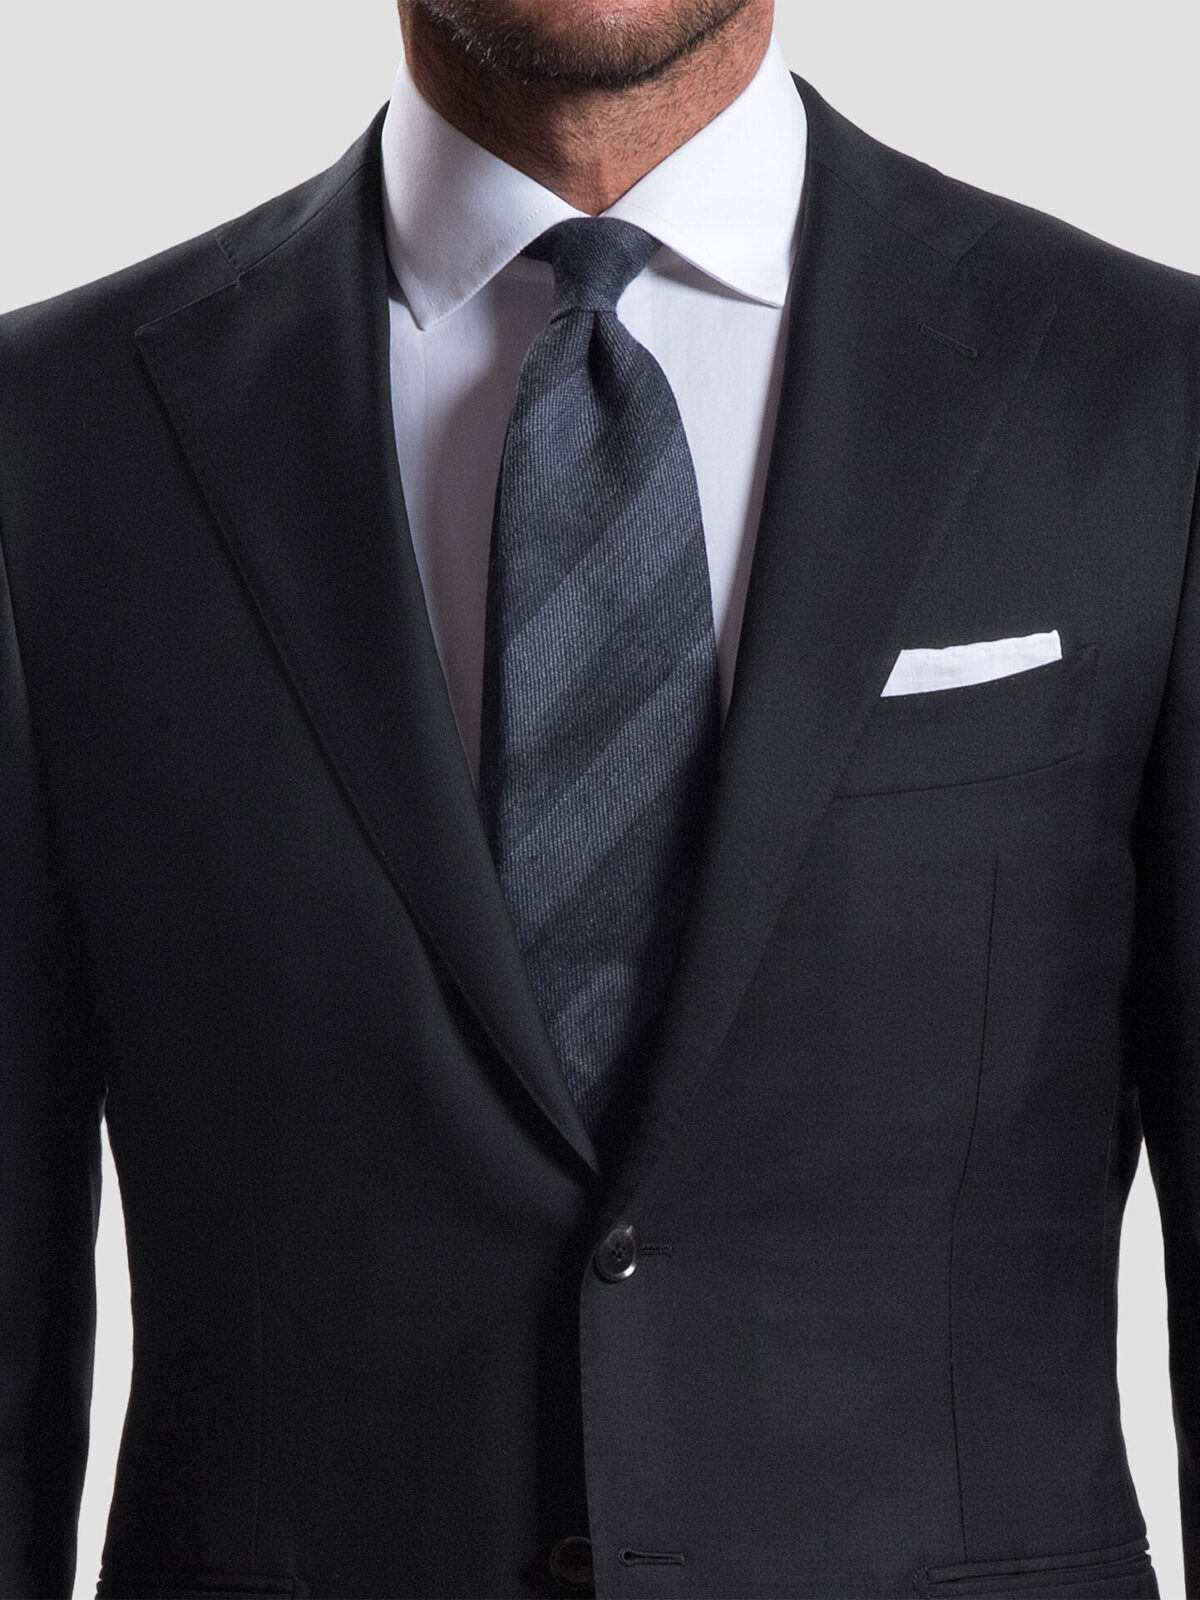 Charcoal and Grey Wool Striped Tie